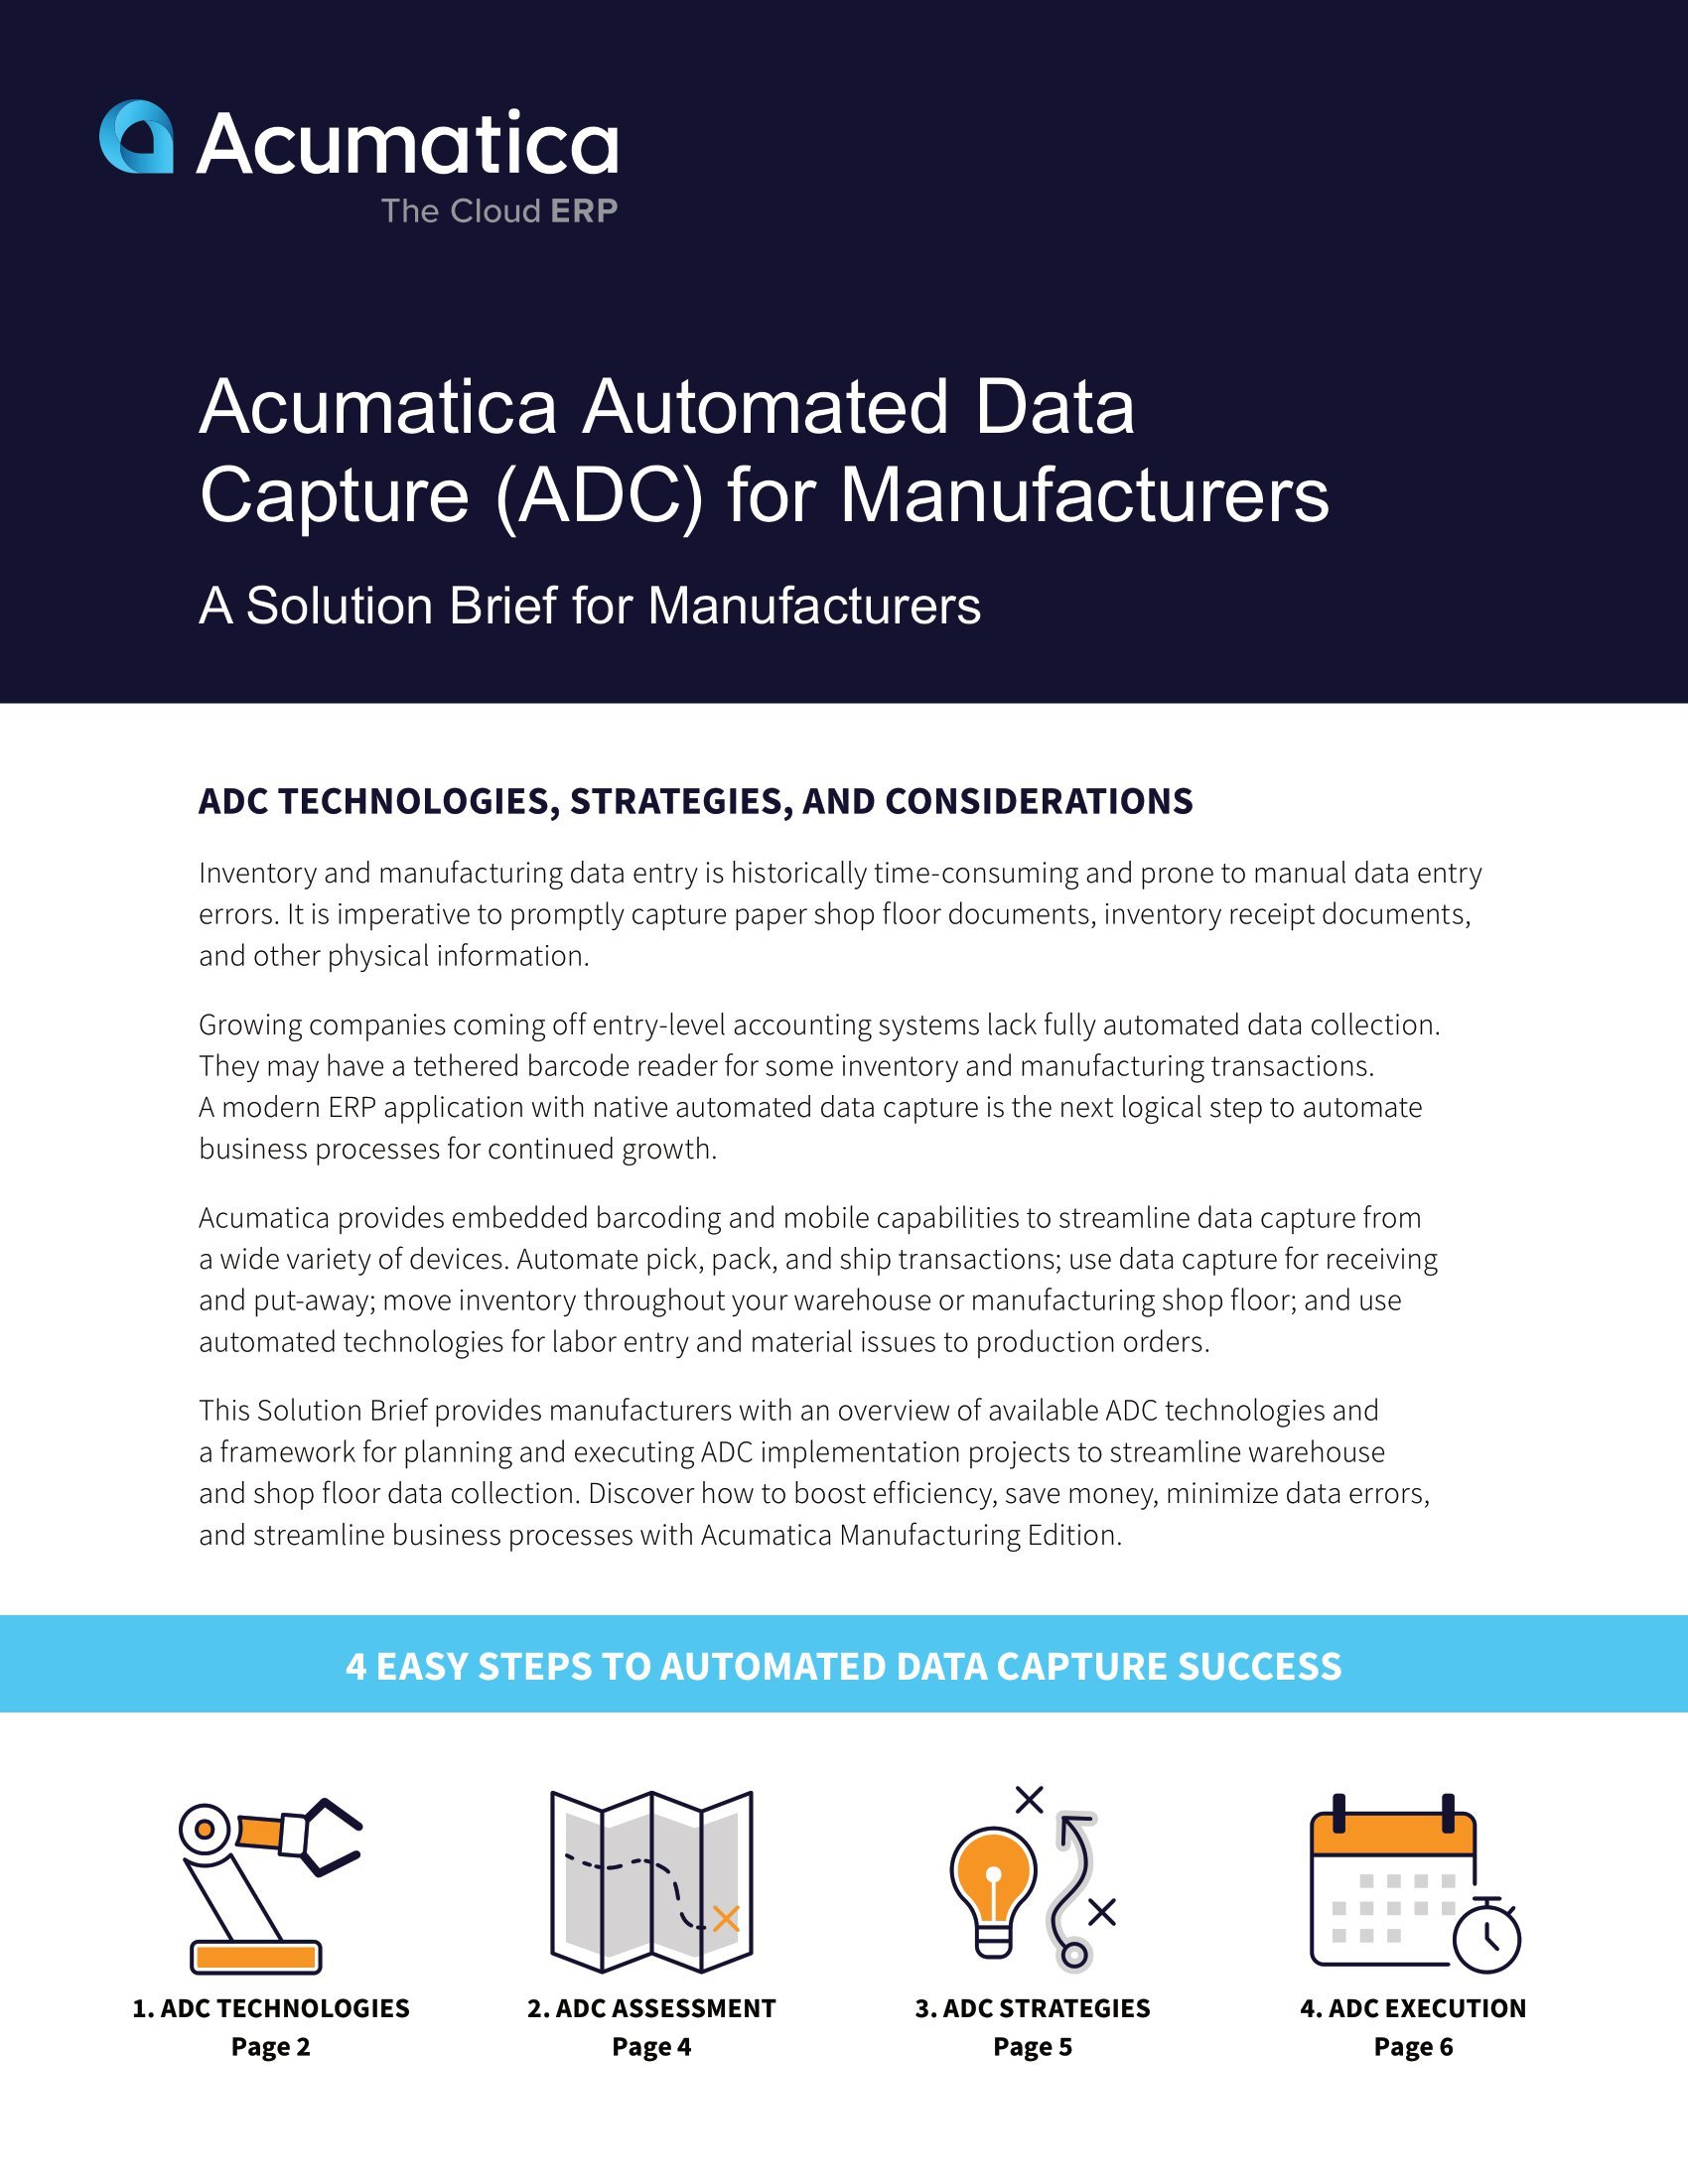 What Every Manufacturer Should Know About Automated Data Capture